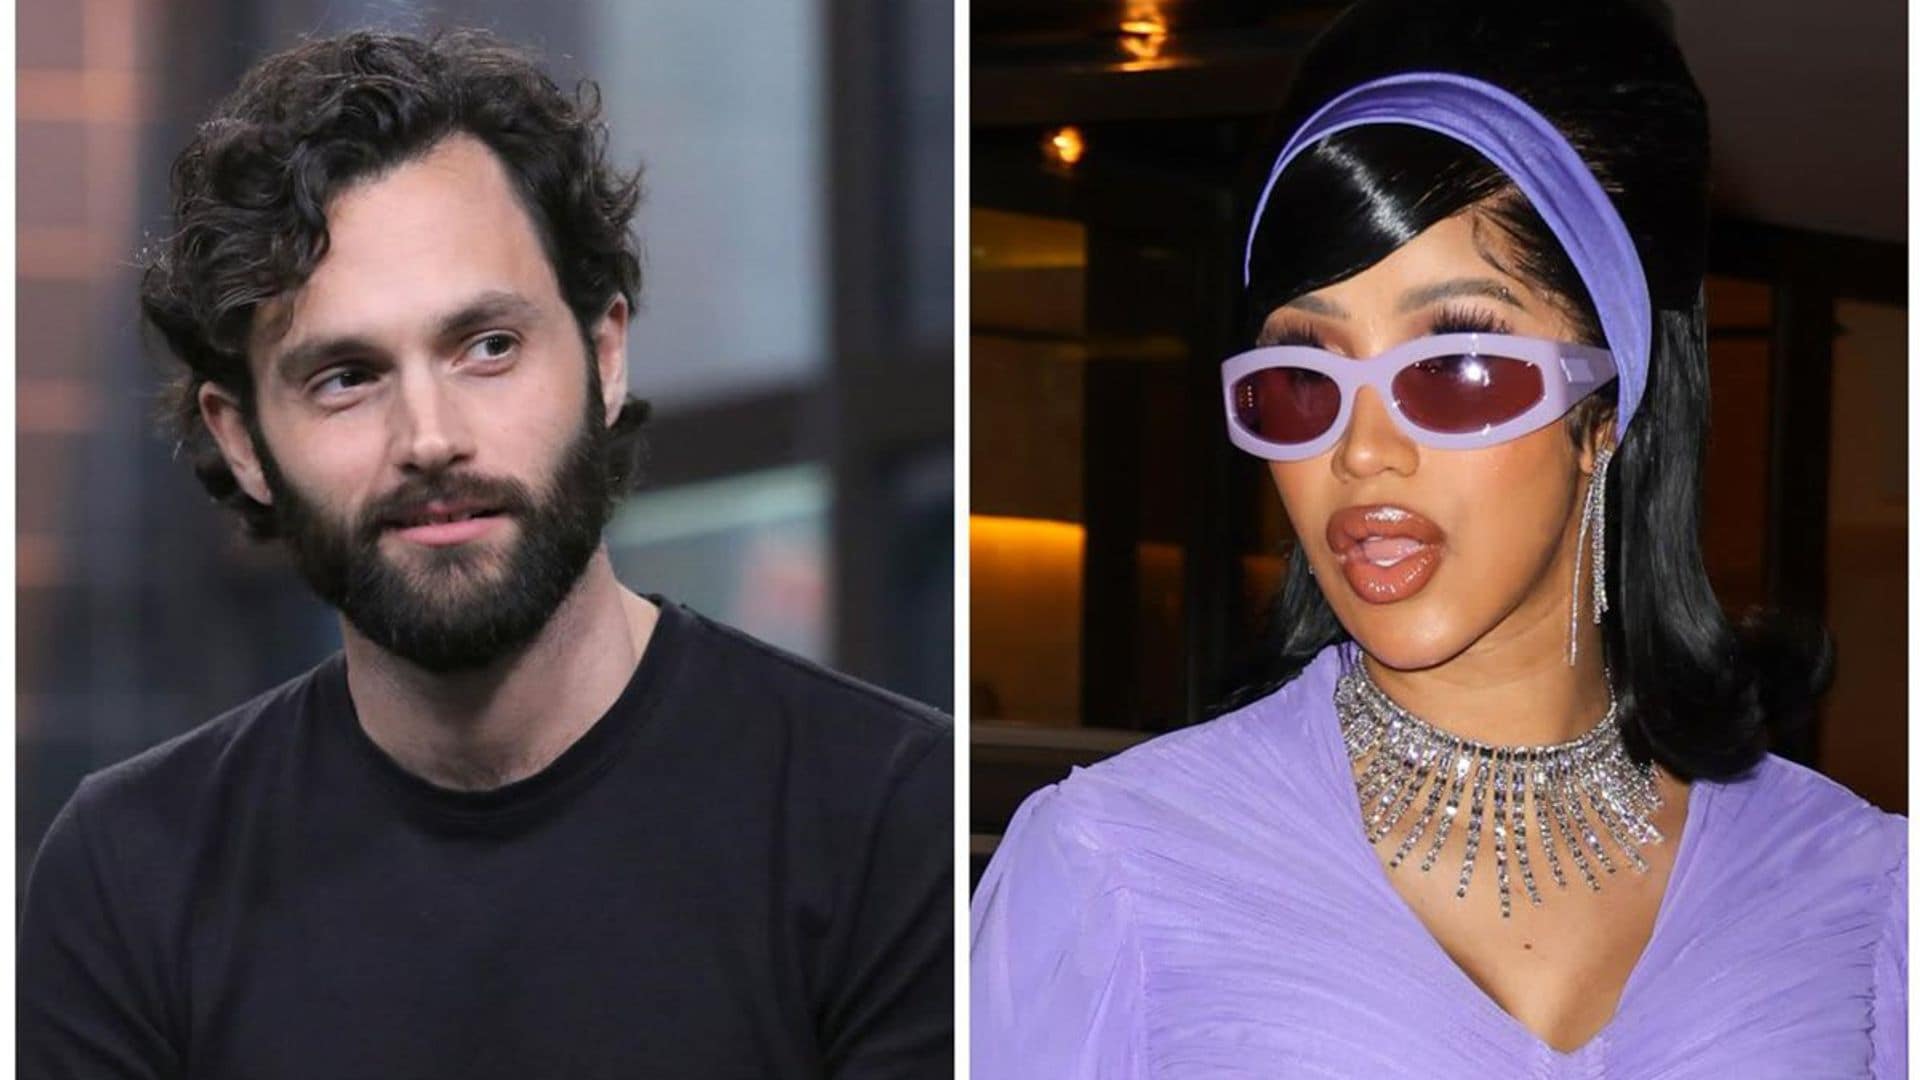 Cardi B and Penn Badgley’s latest interaction proves they’re one another’s biggest fan